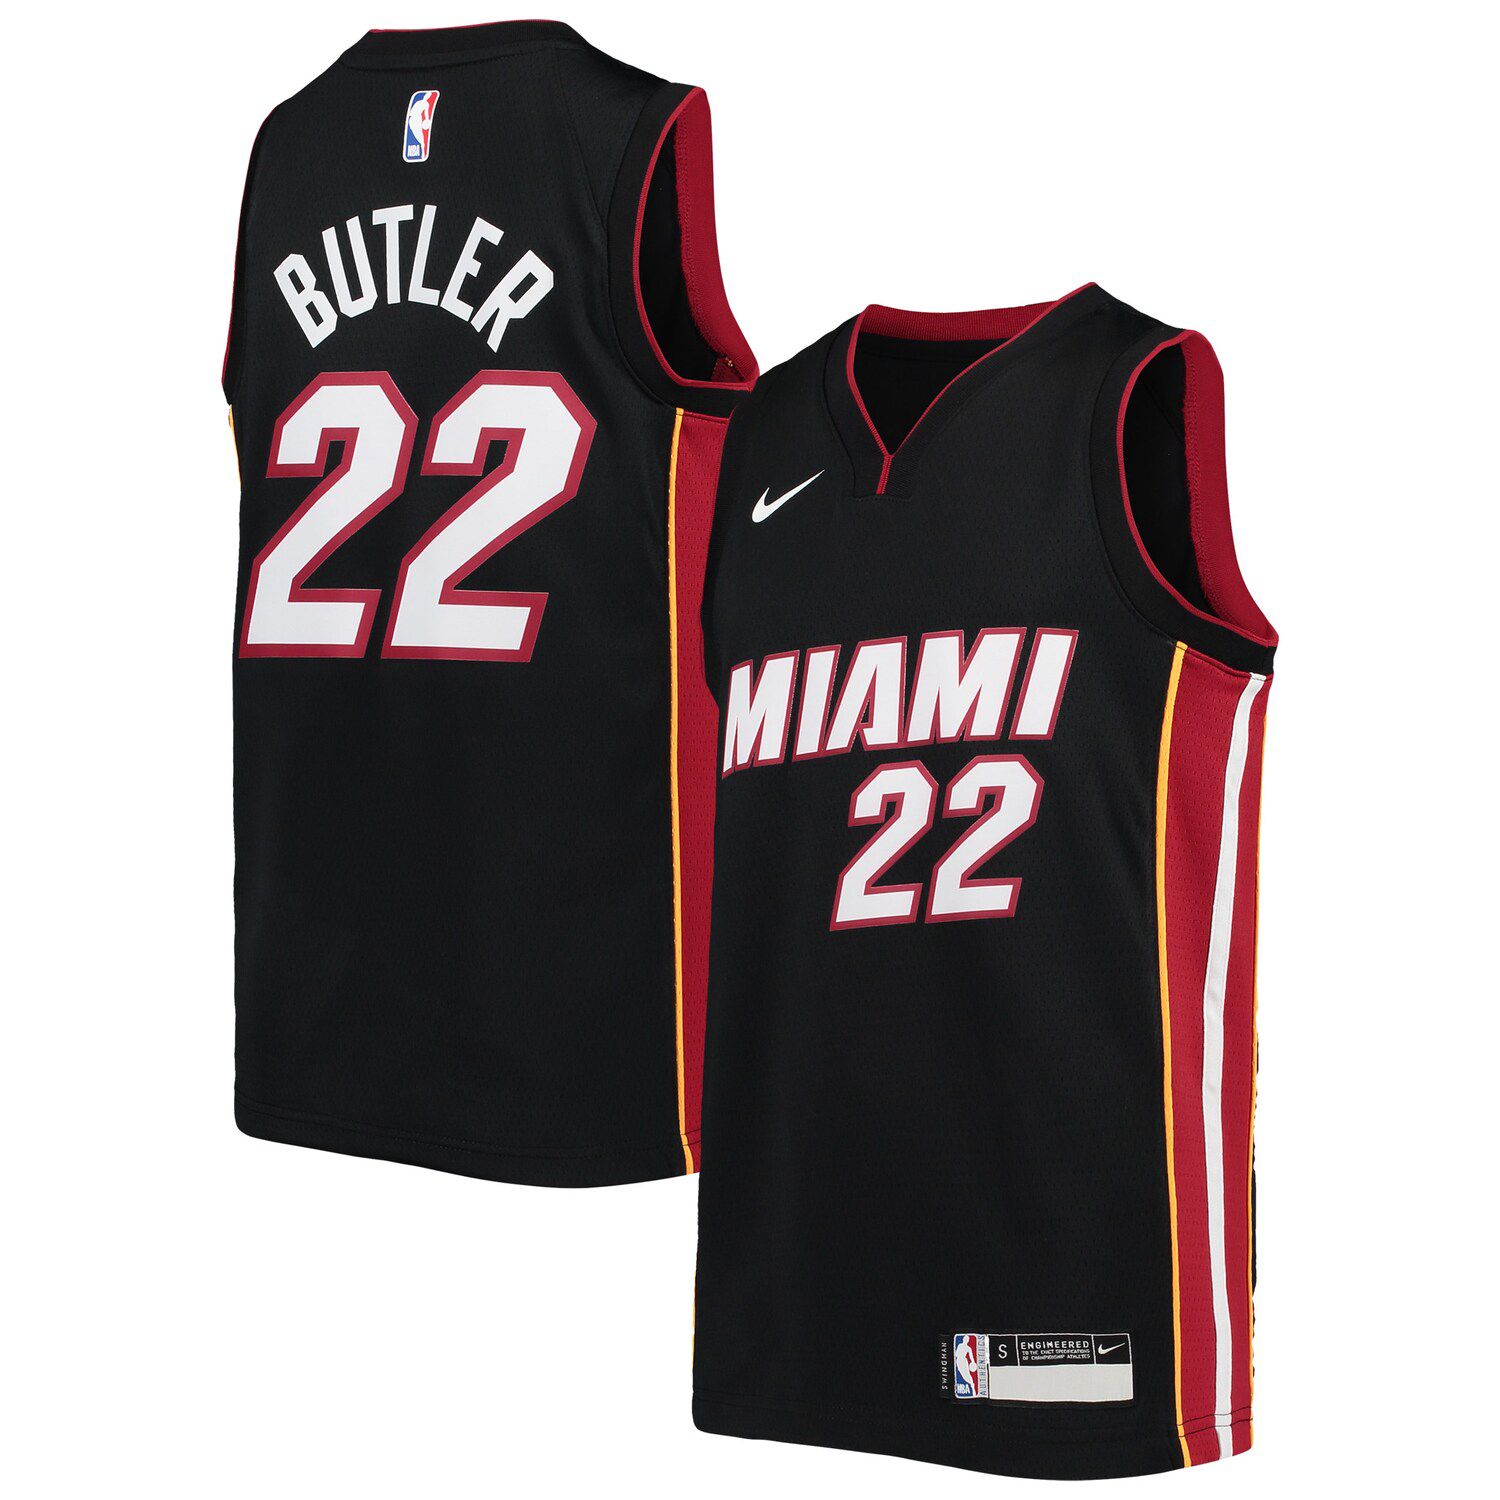 jimmy butler youth jersey